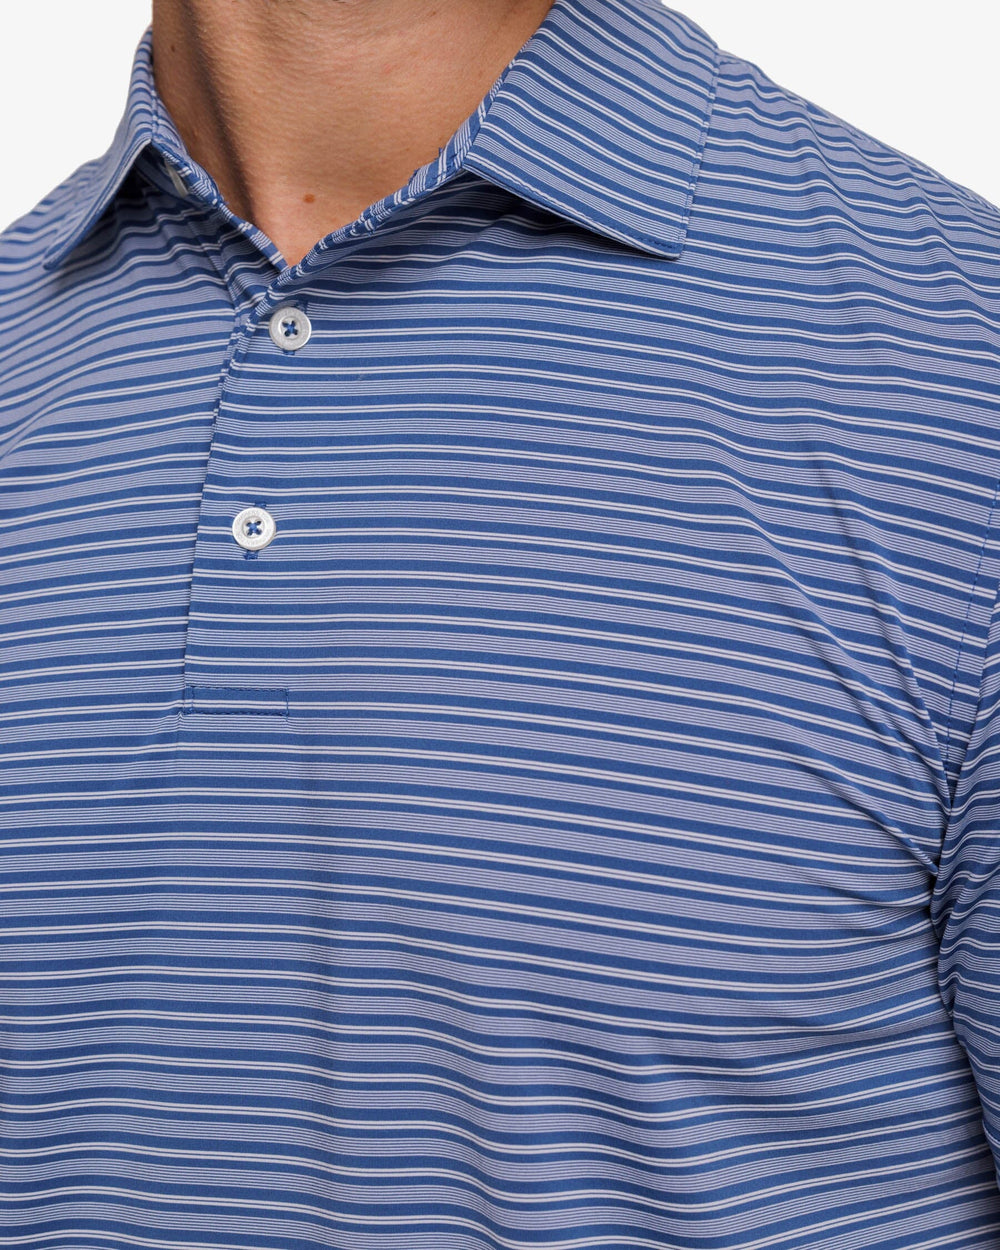 The detail view of the Southern Tide brrr°®-eeze Bowen Stripe Performance Polo Shirt by Southern Tide - Aged Denim